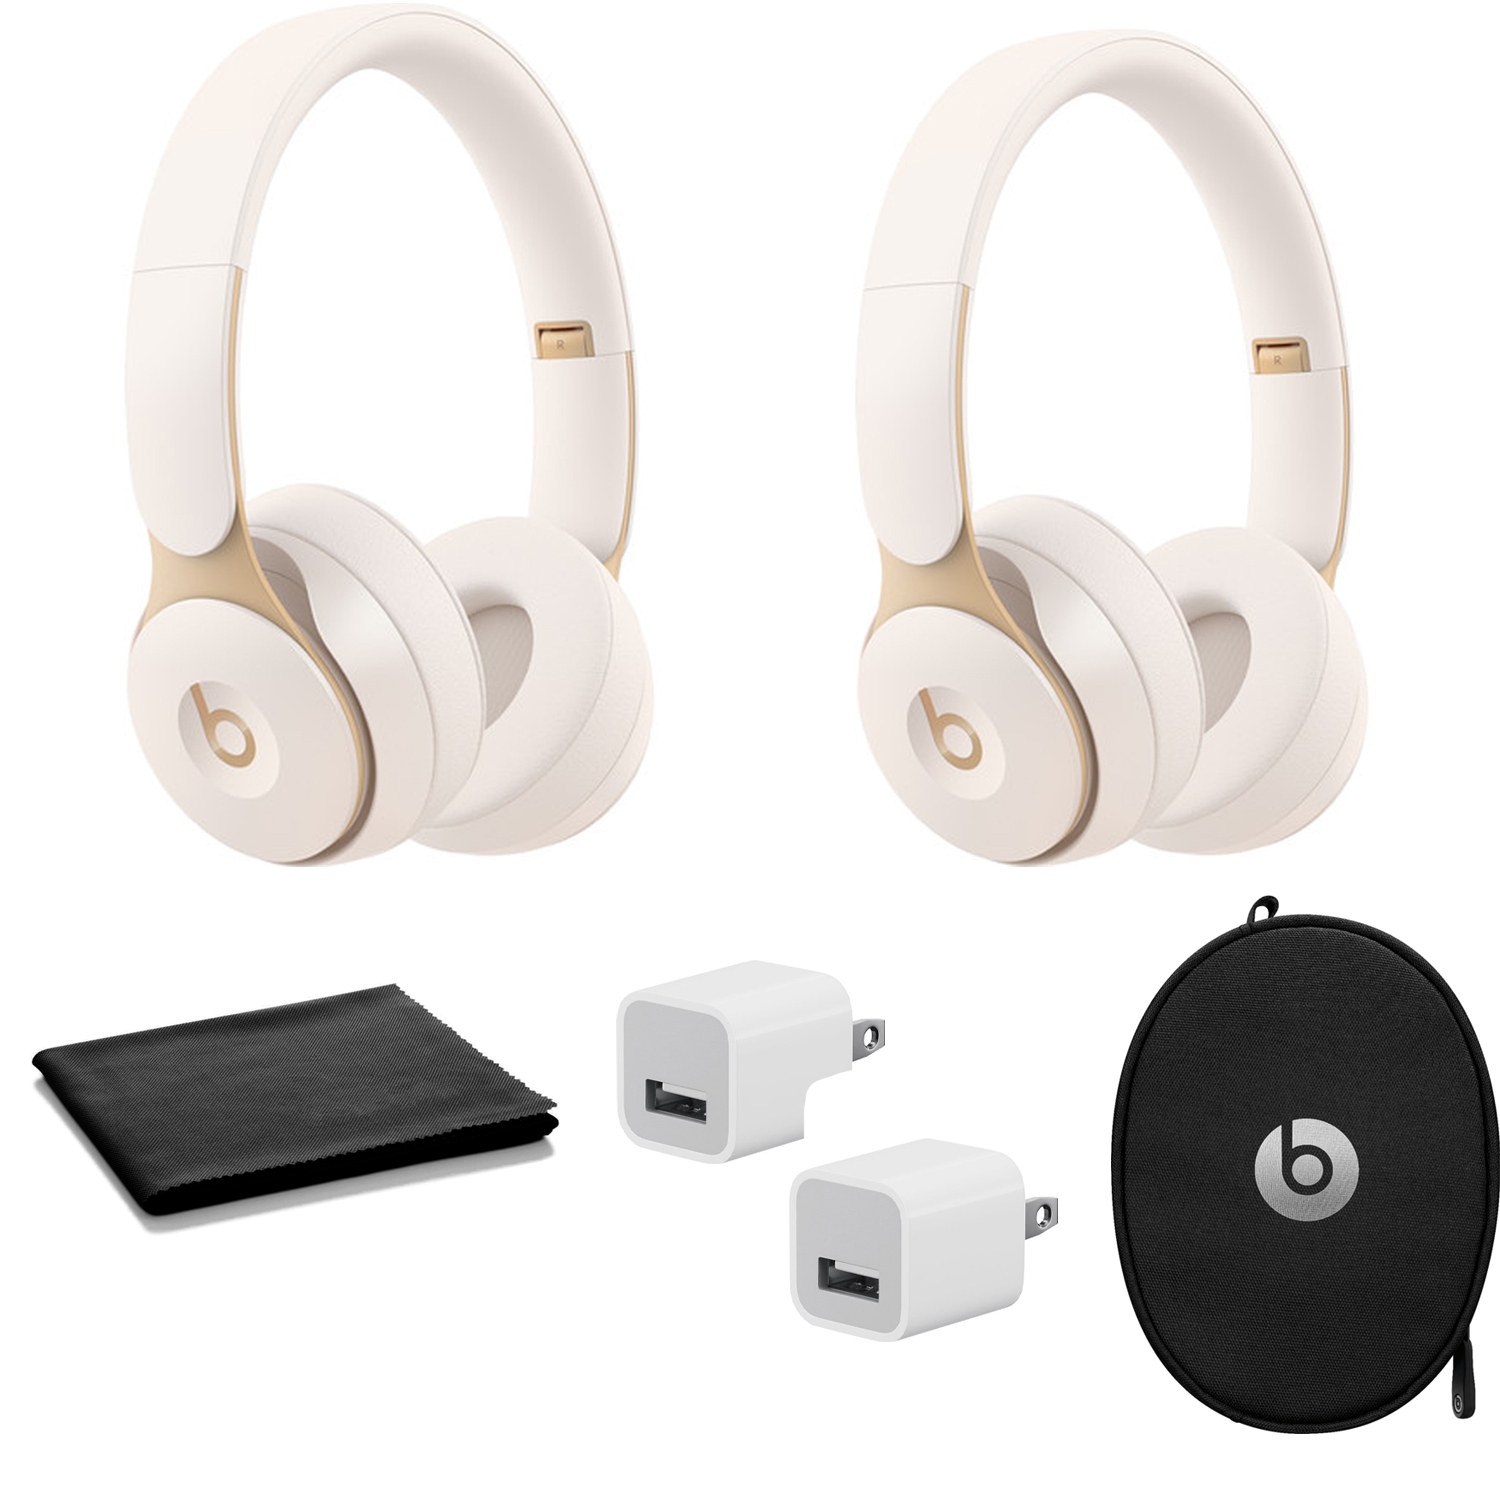  Beats Solo Pro Wireless Noise Cancelling On-Ear Headphones -  Apple H1 Headphone Chip, Class 1 Bluetooth, 22 Hours of Listening Time,  Built-in Microphone - Ivory : Electronics